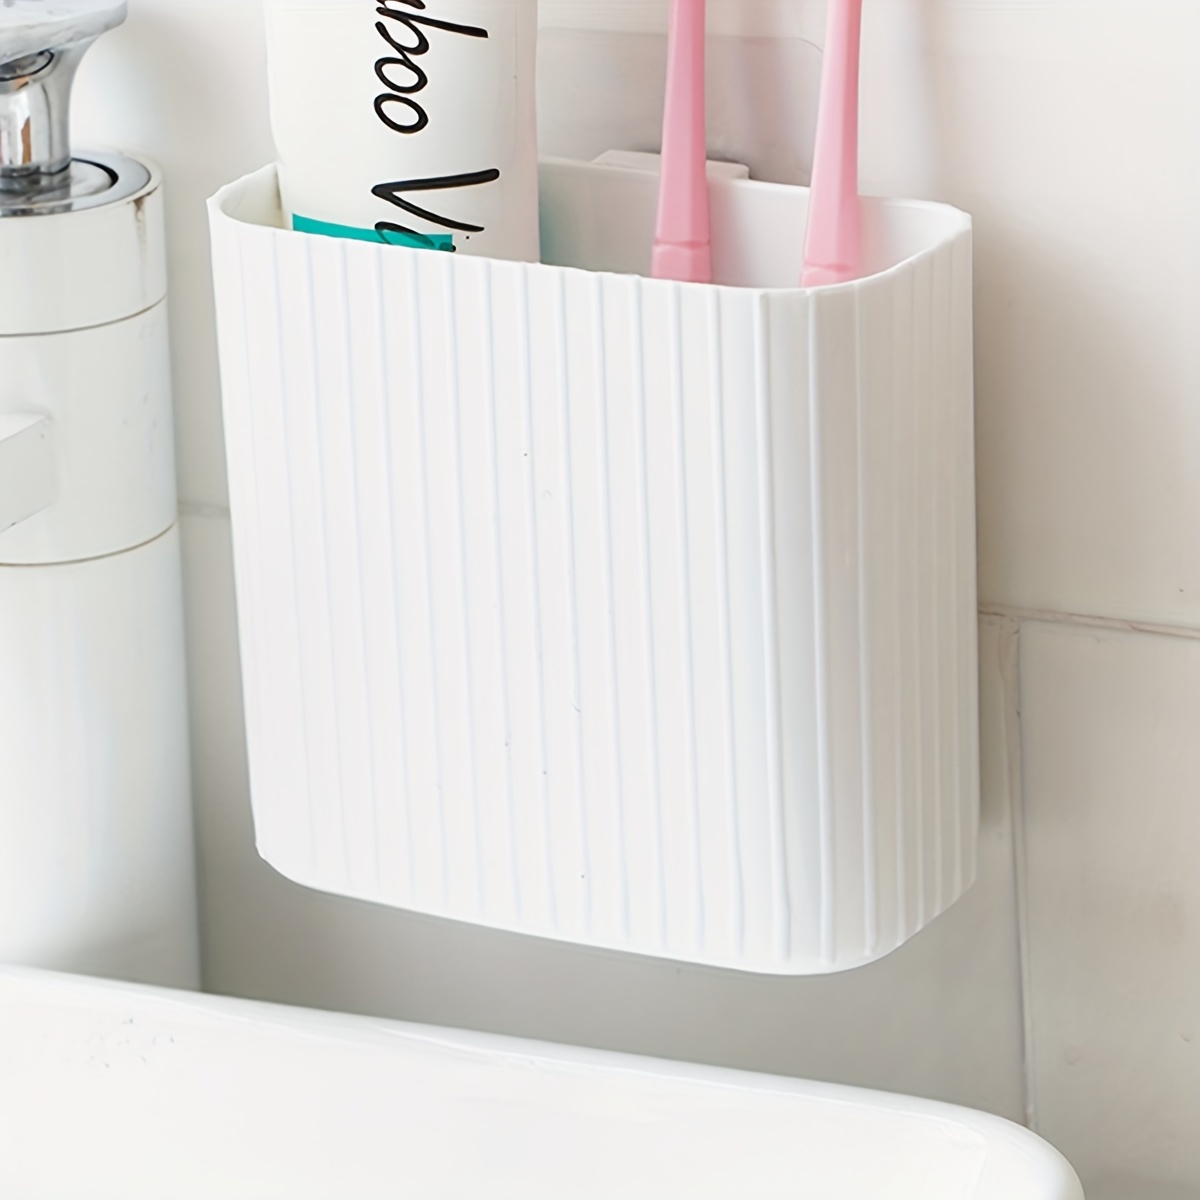 

1pc Wall Mounted Toothbrush Storage Box, Plastic Hanging Toiletry Storage Holder, Punch Free Sundries Storage Rack, Household Storage And Organization For Kitchen, Bedroom, Bathroom, Office, Desk